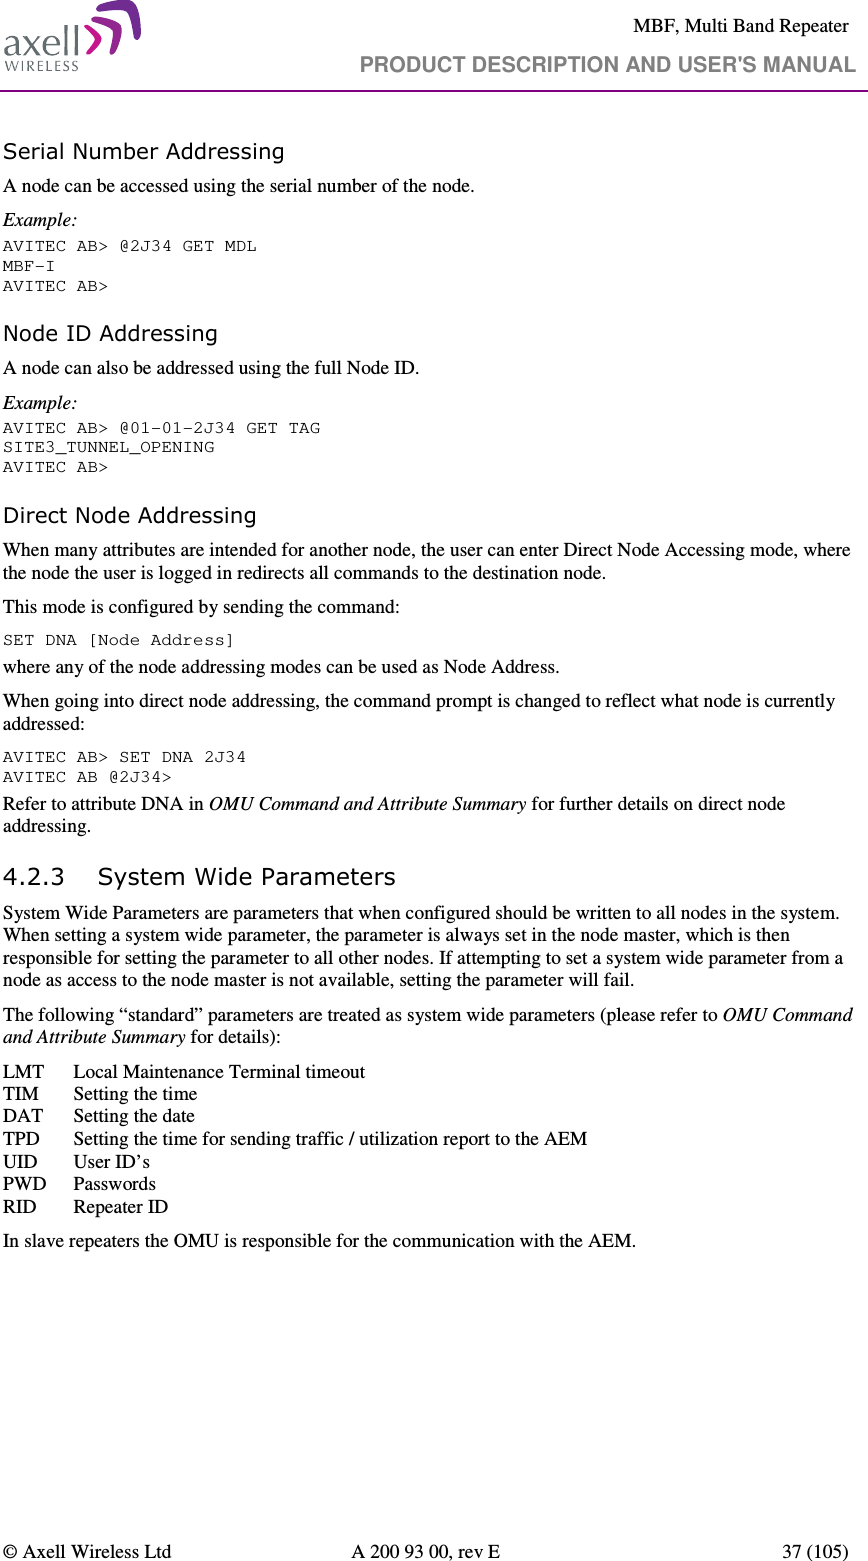     MBF, Multi Band Repeater                                     PRODUCT DESCRIPTION AND USER&apos;S MANUAL   © Axell Wireless Ltd  A 200 93 00, rev E  37 (105)  Serial Number Addressing A node can be accessed using the serial number of the node. Example: AVITEC AB&gt; @2J34 GET MDL MBF-I AVITEC AB&gt; Node ID Addressing A node can also be addressed using the full Node ID. Example: AVITEC AB&gt; @01-01-2J34 GET TAG SITE3_TUNNEL_OPENING AVITEC AB&gt; Direct Node Addressing When many attributes are intended for another node, the user can enter Direct Node Accessing mode, where the node the user is logged in redirects all commands to the destination node.  This mode is configured by sending the command: SET DNA [Node Address] where any of the node addressing modes can be used as Node Address.  When going into direct node addressing, the command prompt is changed to reflect what node is currently addressed: AVITEC AB&gt; SET DNA 2J34 AVITEC AB @2J34&gt;  Refer to attribute DNA in OMU Command and Attribute Summary for further details on direct node addressing. 4.2.3 System Wide Parameters System Wide Parameters are parameters that when configured should be written to all nodes in the system. When setting a system wide parameter, the parameter is always set in the node master, which is then responsible for setting the parameter to all other nodes. If attempting to set a system wide parameter from a node as access to the node master is not available, setting the parameter will fail. The following “standard” parameters are treated as system wide parameters (please refer to OMU Command and Attribute Summary for details): LMT   Local Maintenance Terminal timeout TIM   Setting the time DAT   Setting the date TPD   Setting the time for sending traffic / utilization report to the AEM UID   User ID’s PWD  Passwords RID   Repeater ID In slave repeaters the OMU is responsible for the communication with the AEM. 